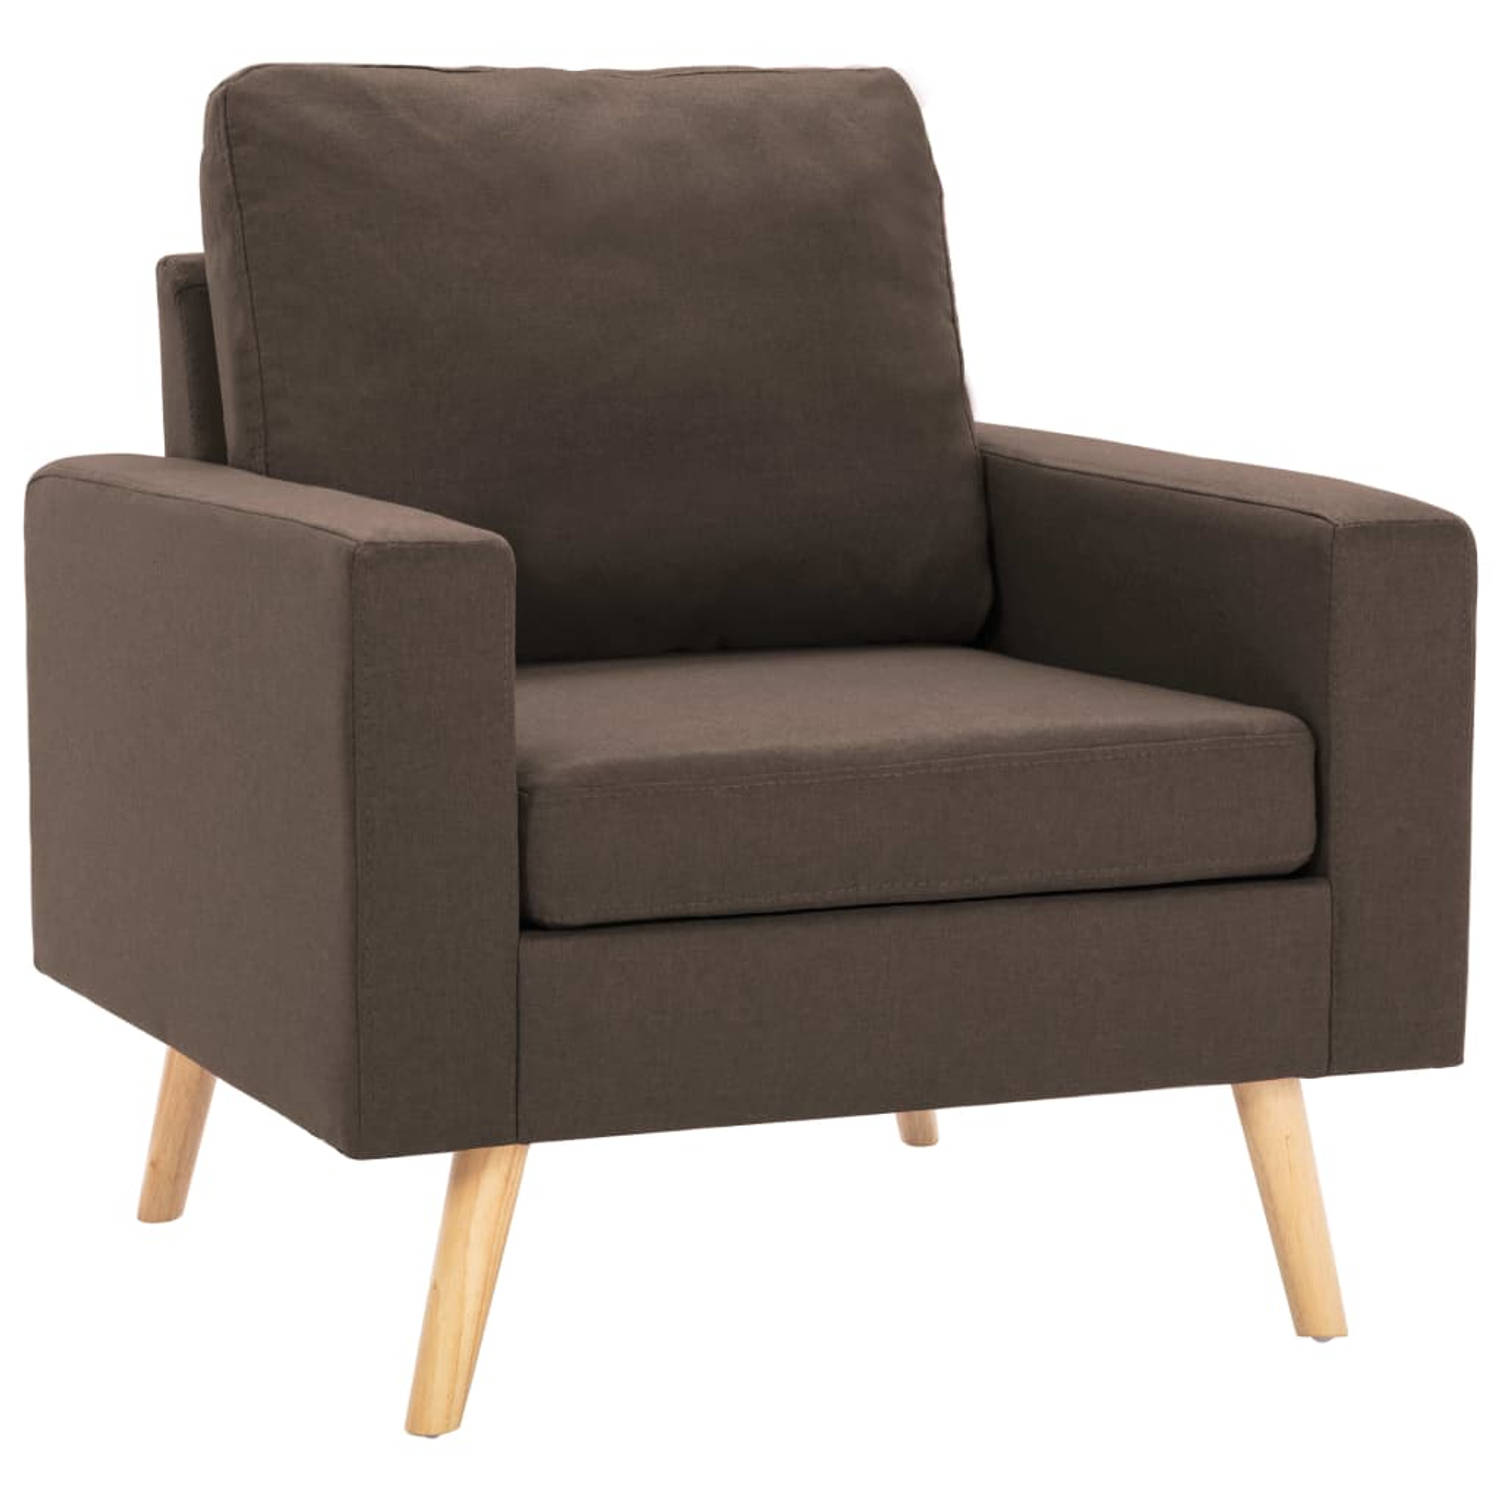 The Living Store Fauteuil stof bruin - Fauteuil